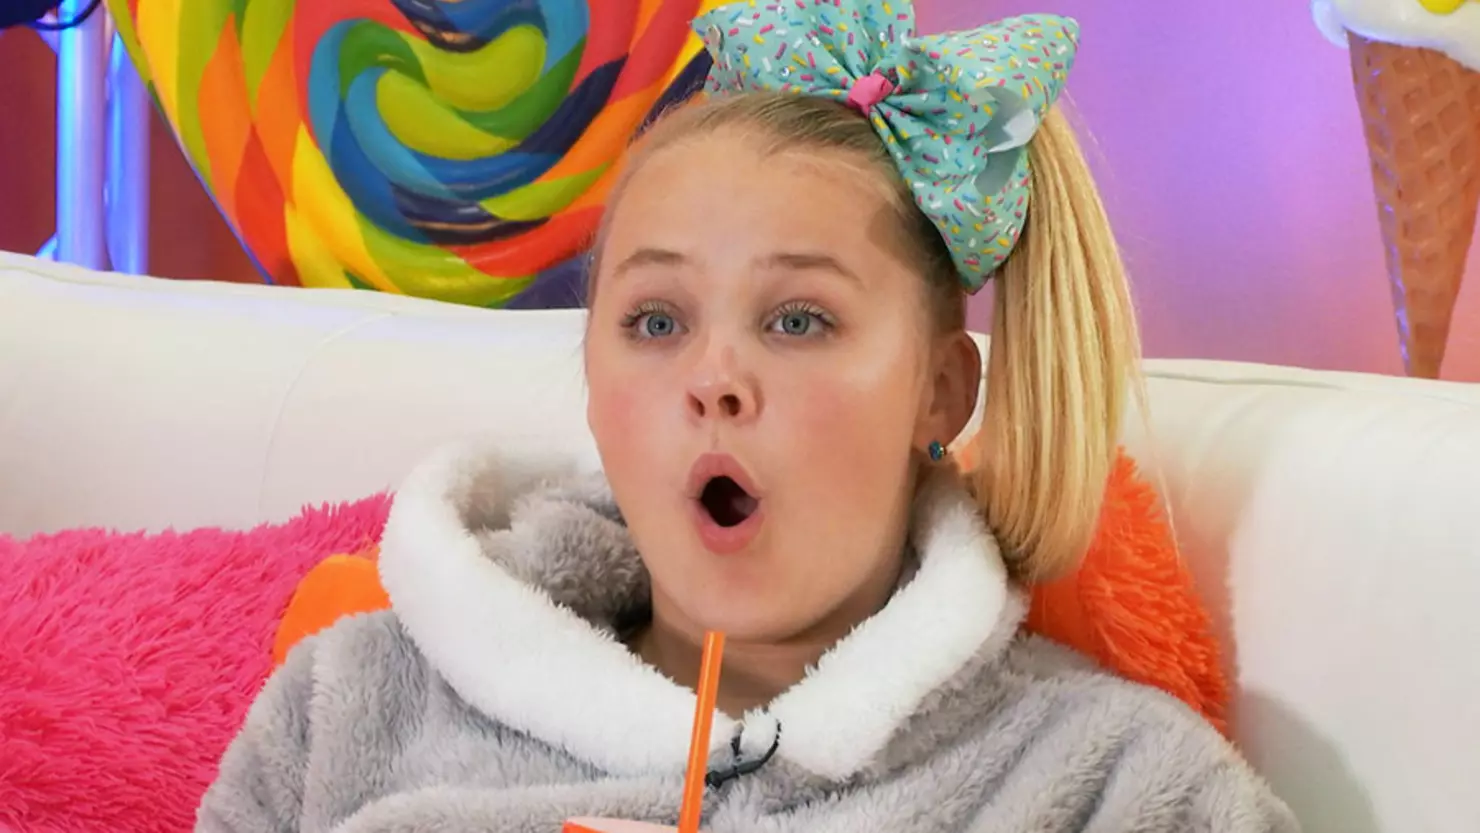 How Old Is JoJo Siwa? This Reality Star Has Grown Up Before Our Eyes